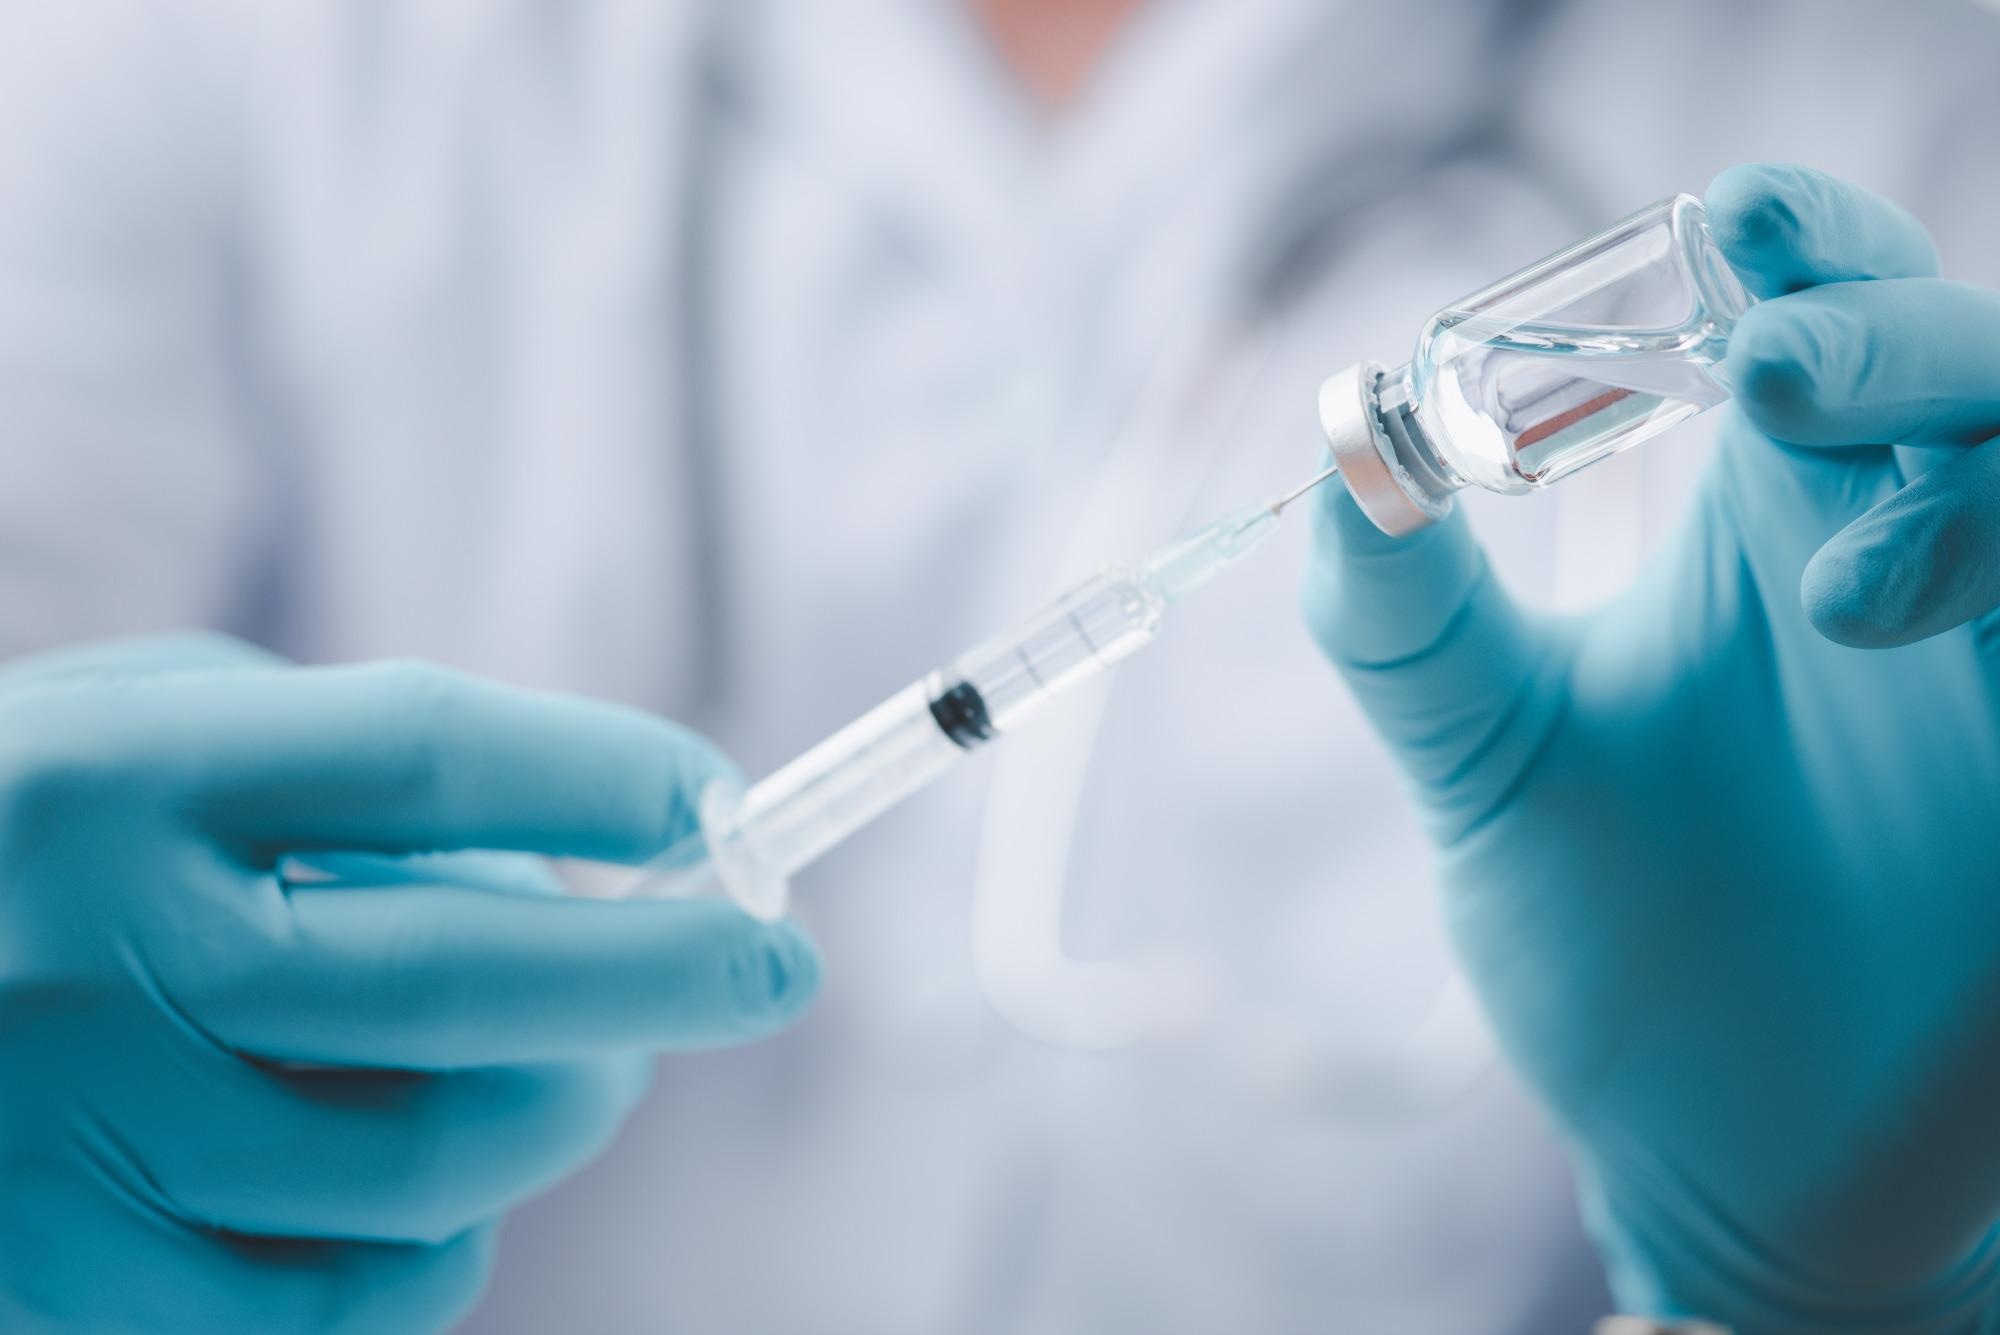 Study: Efficacy and Safety of the RBD-Dimer–Based Covid-19 Vaccine ZF2001 in Adults. Image Credit: LookerStudio / Shutterstock